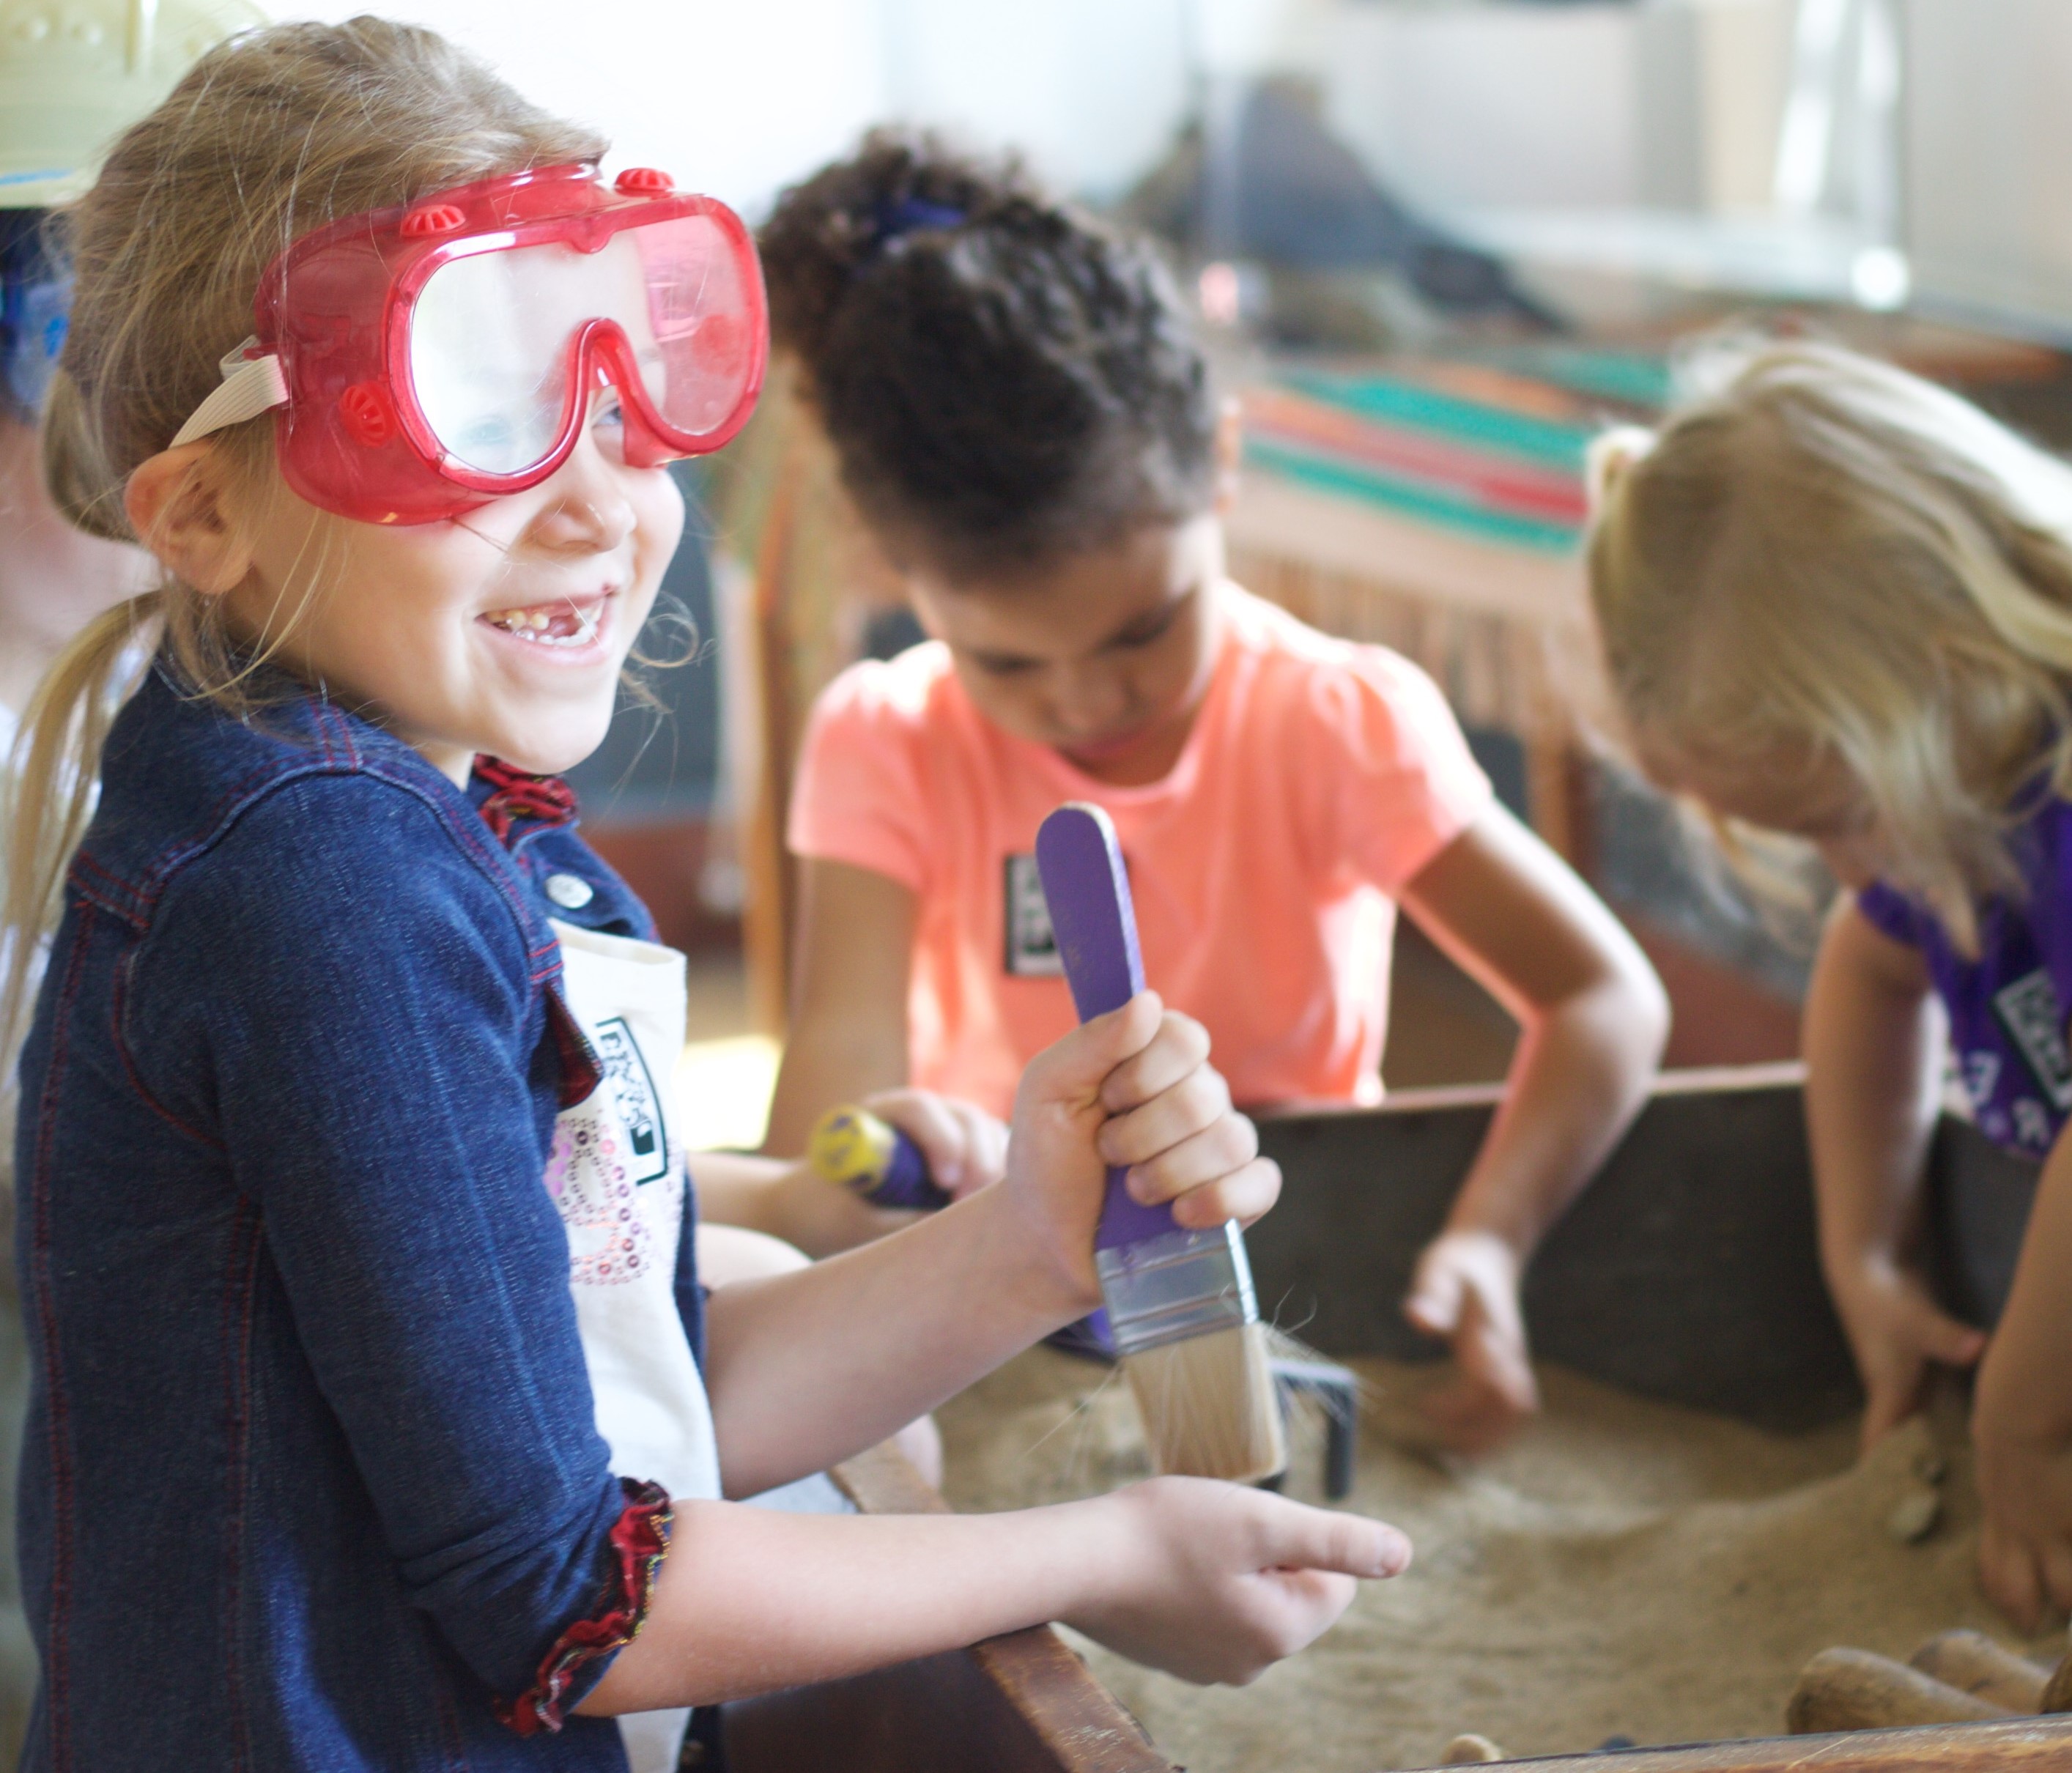 Kids' Science, Experiential Education, Science Education, Fun Summer Activities